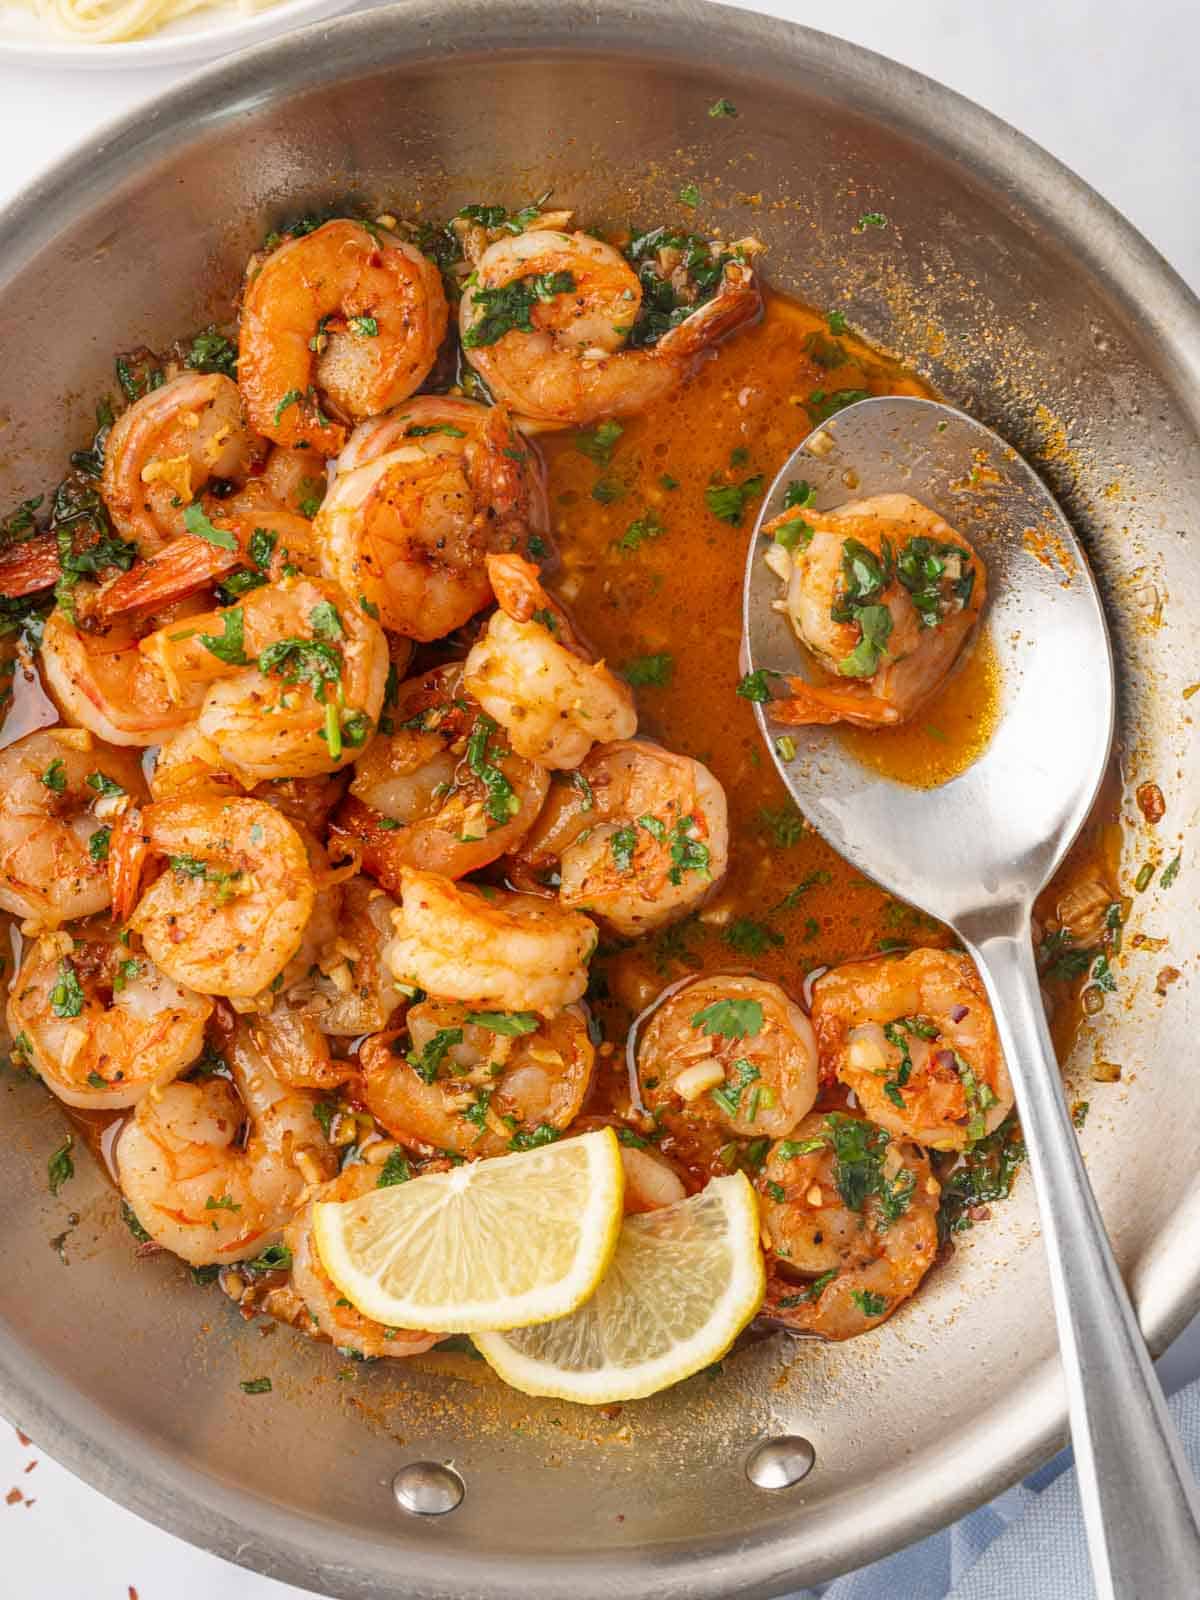 A spoon picks up a piece of spicy shrimp form a skillet.